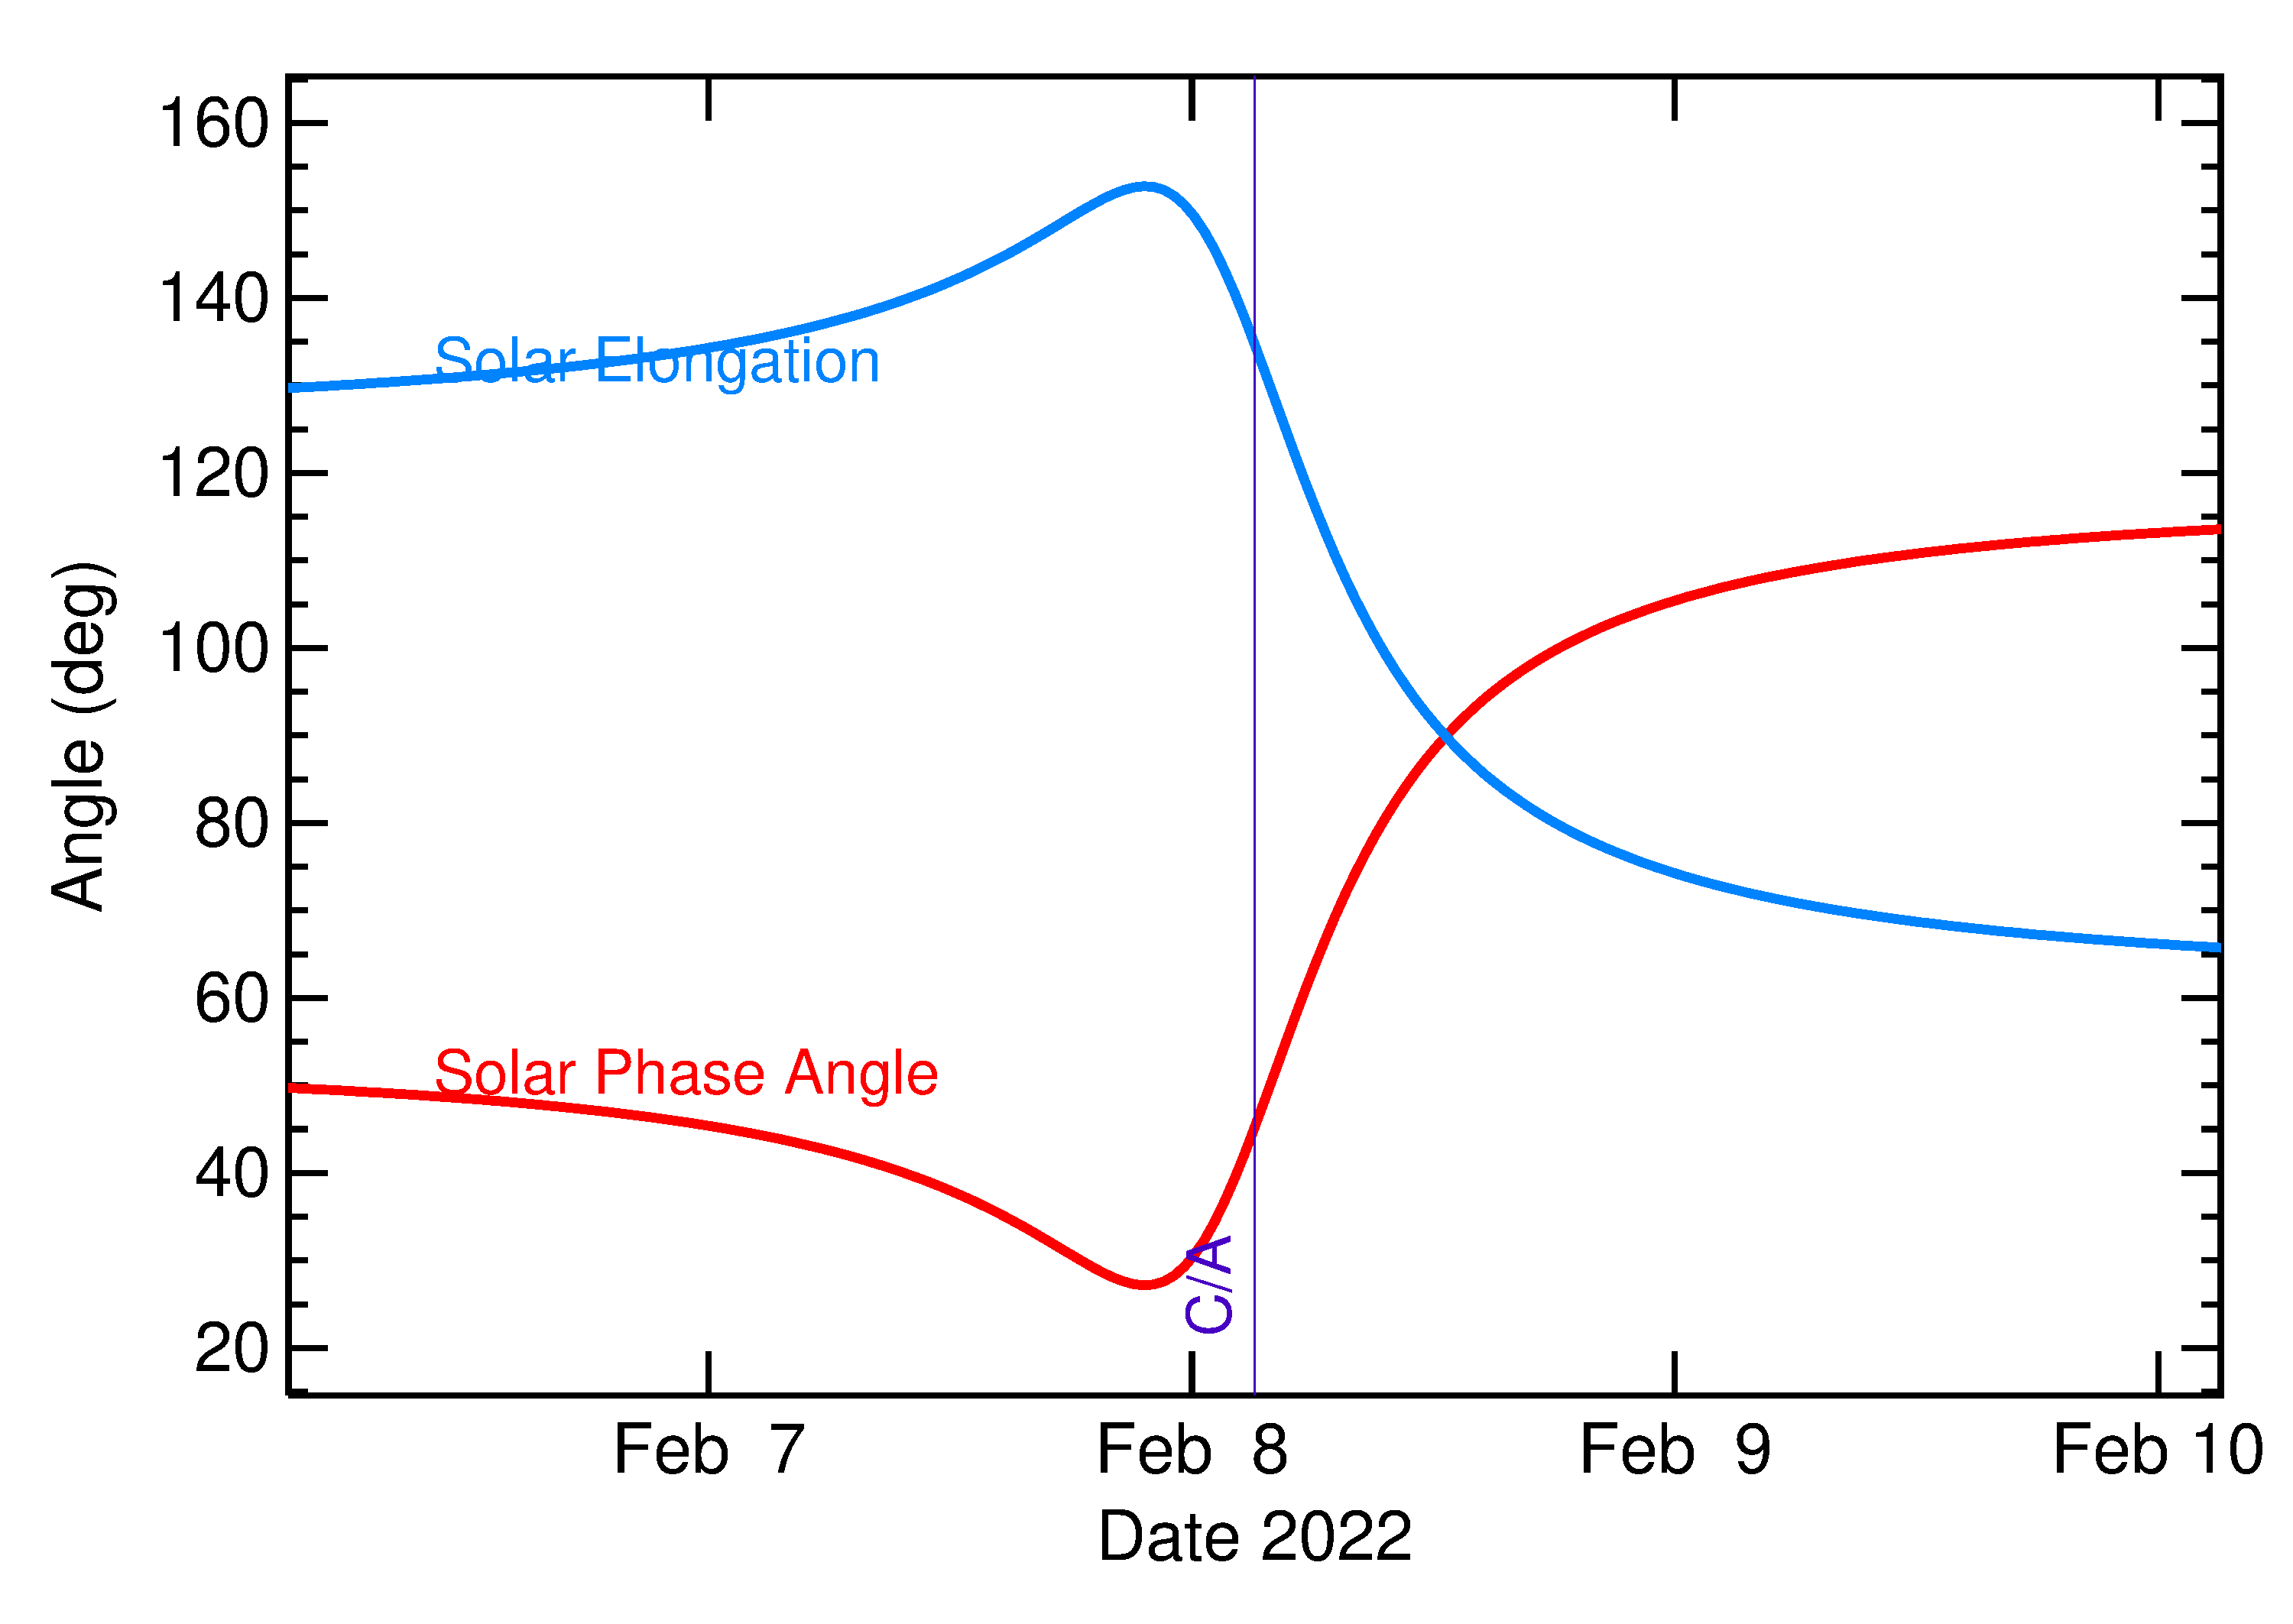 Solar Elongation and Solar Phase Angle of 2022 CD3 in the days around closest approach